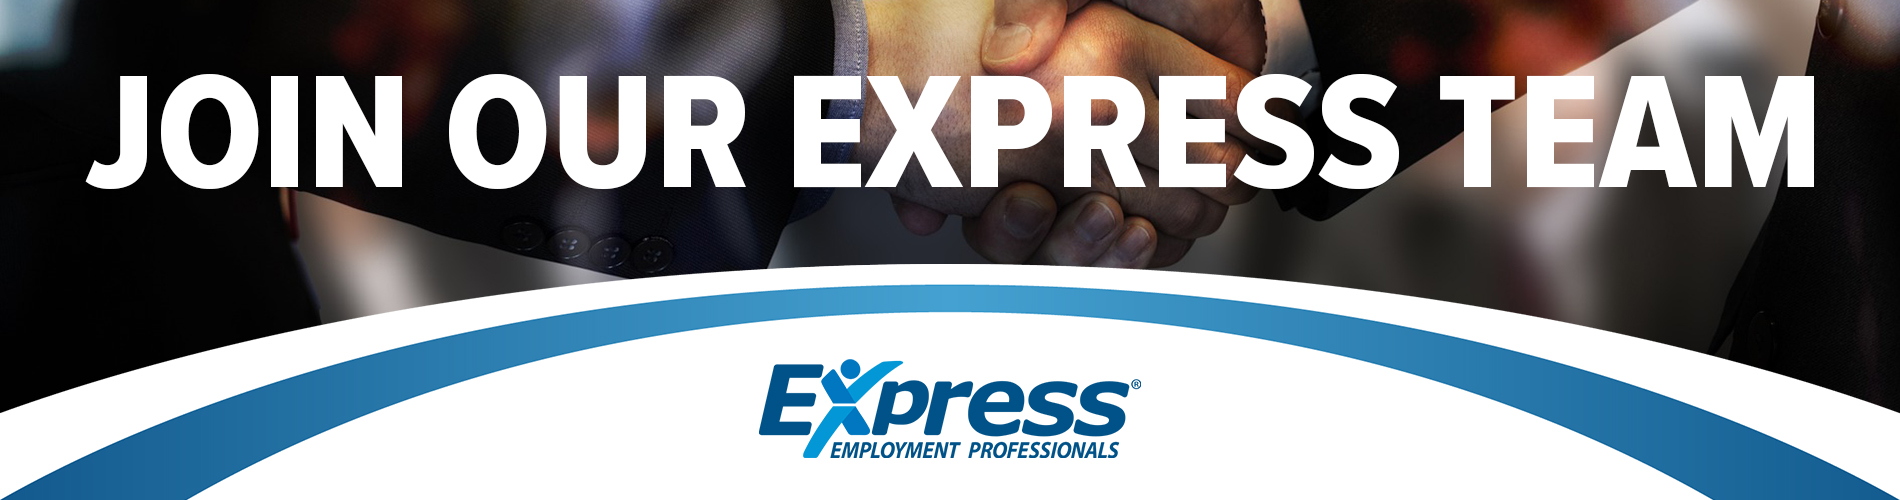 Join Our Express Team, Lakeland Recruiting Jobs Near me